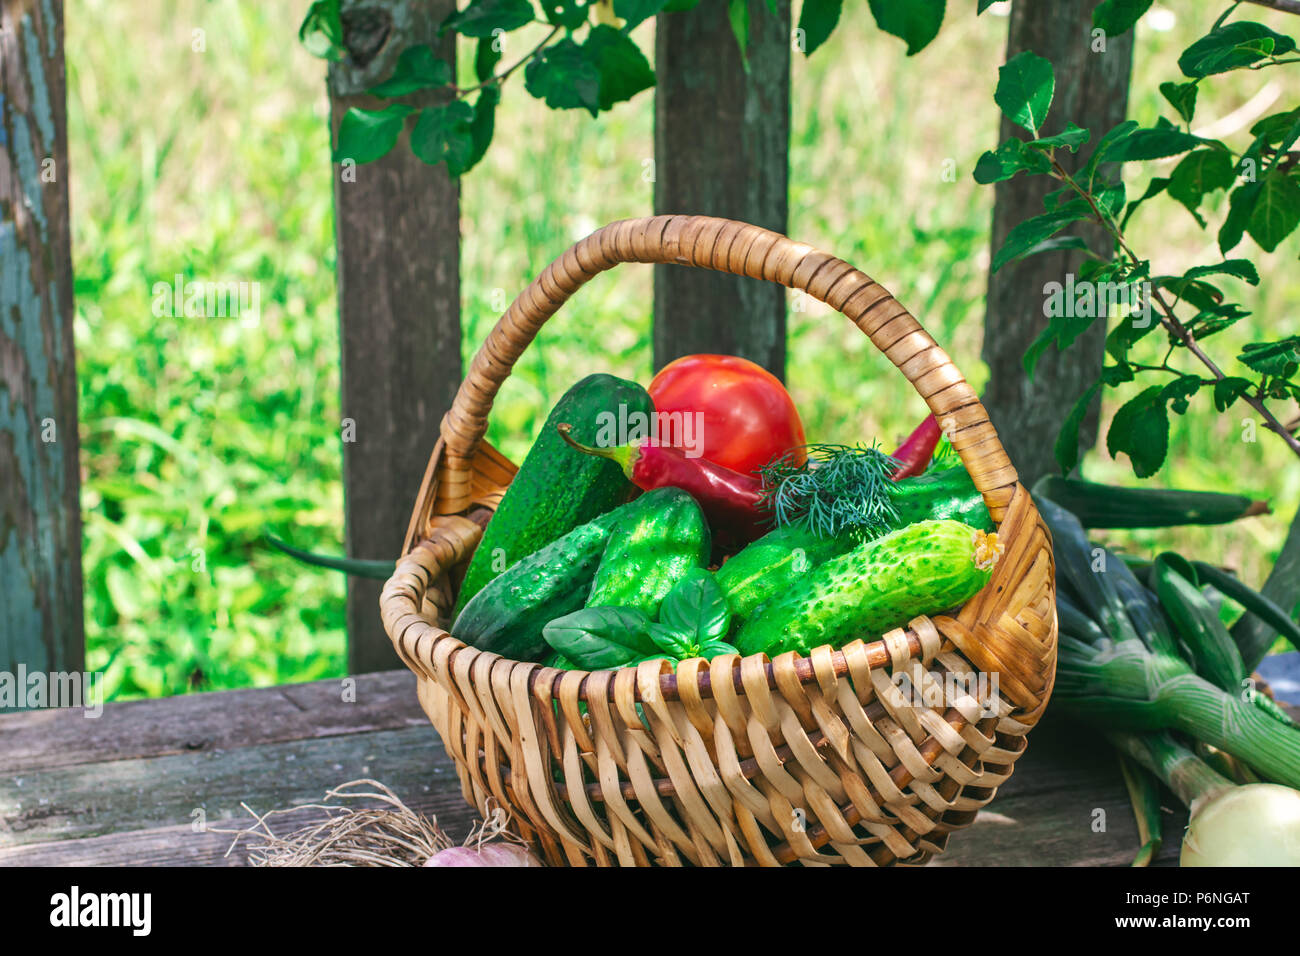 Basket of vegetables outdoors Stock Photo